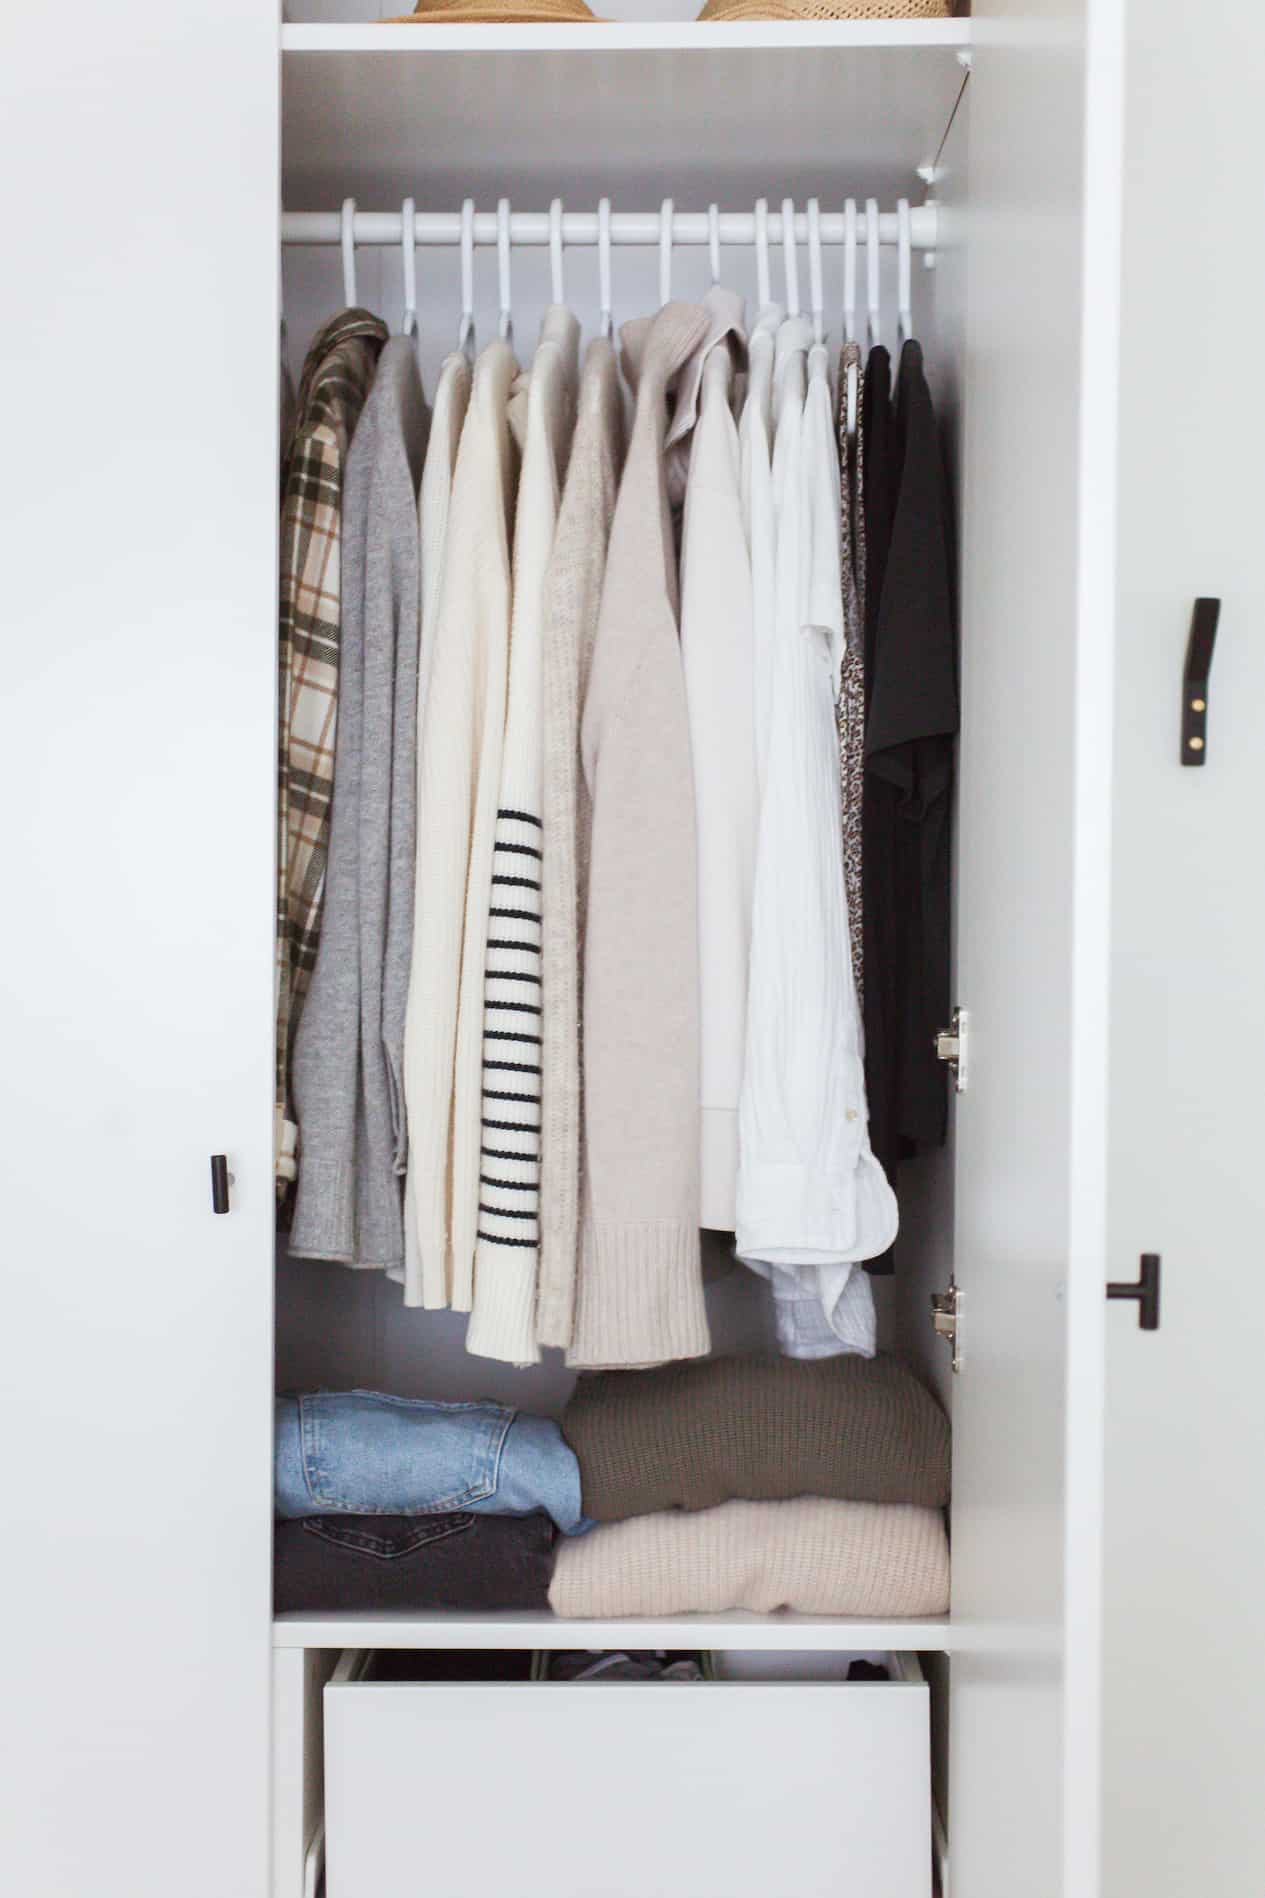 Clothing hung up in a closet.